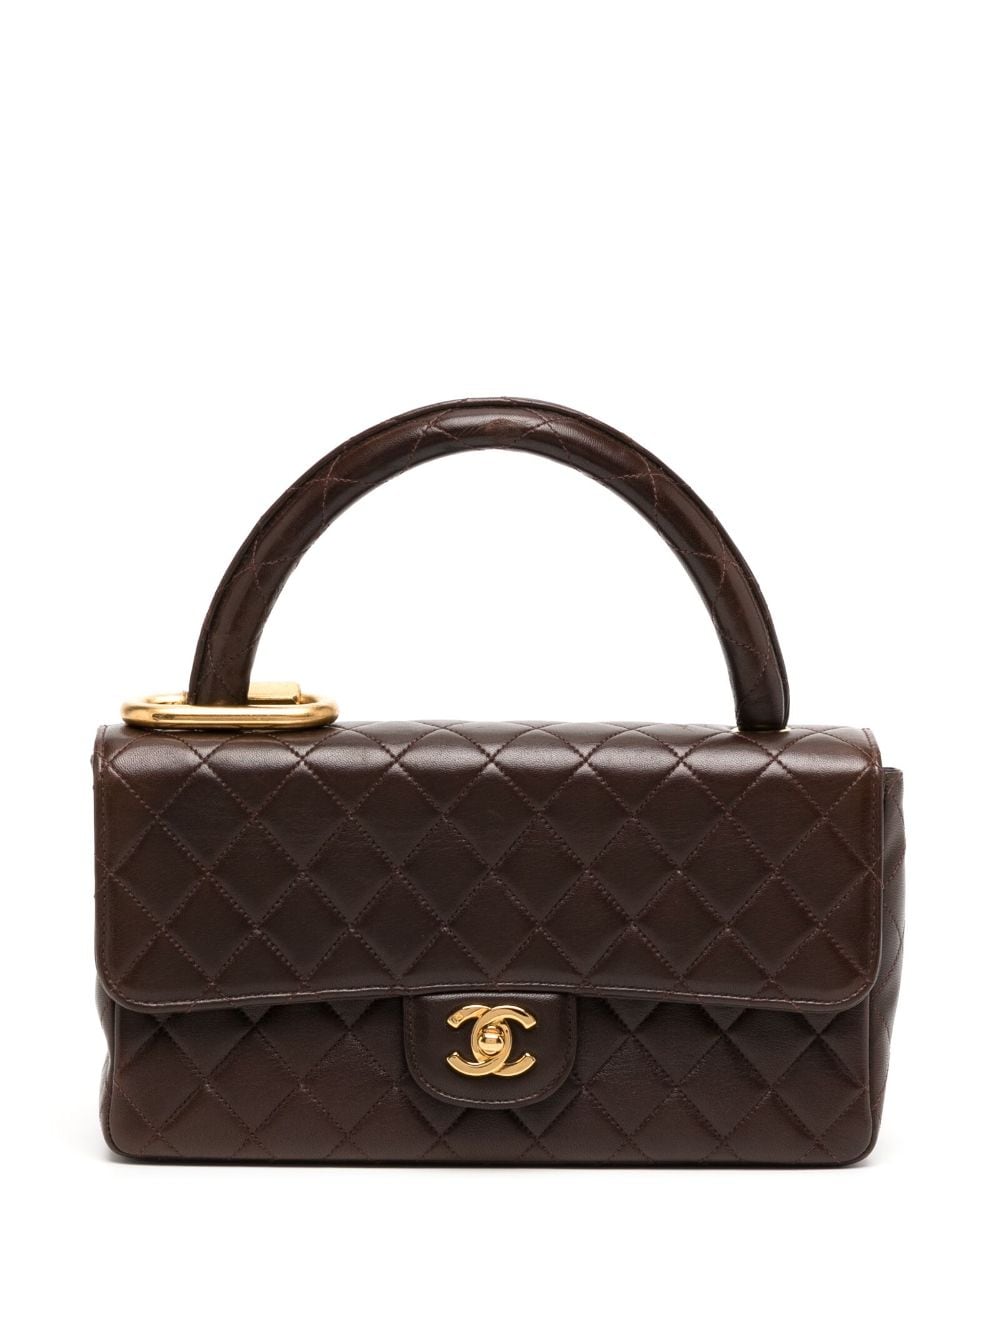 The Luxury Price Boom: Why You Should Invest in Chanel Handbags